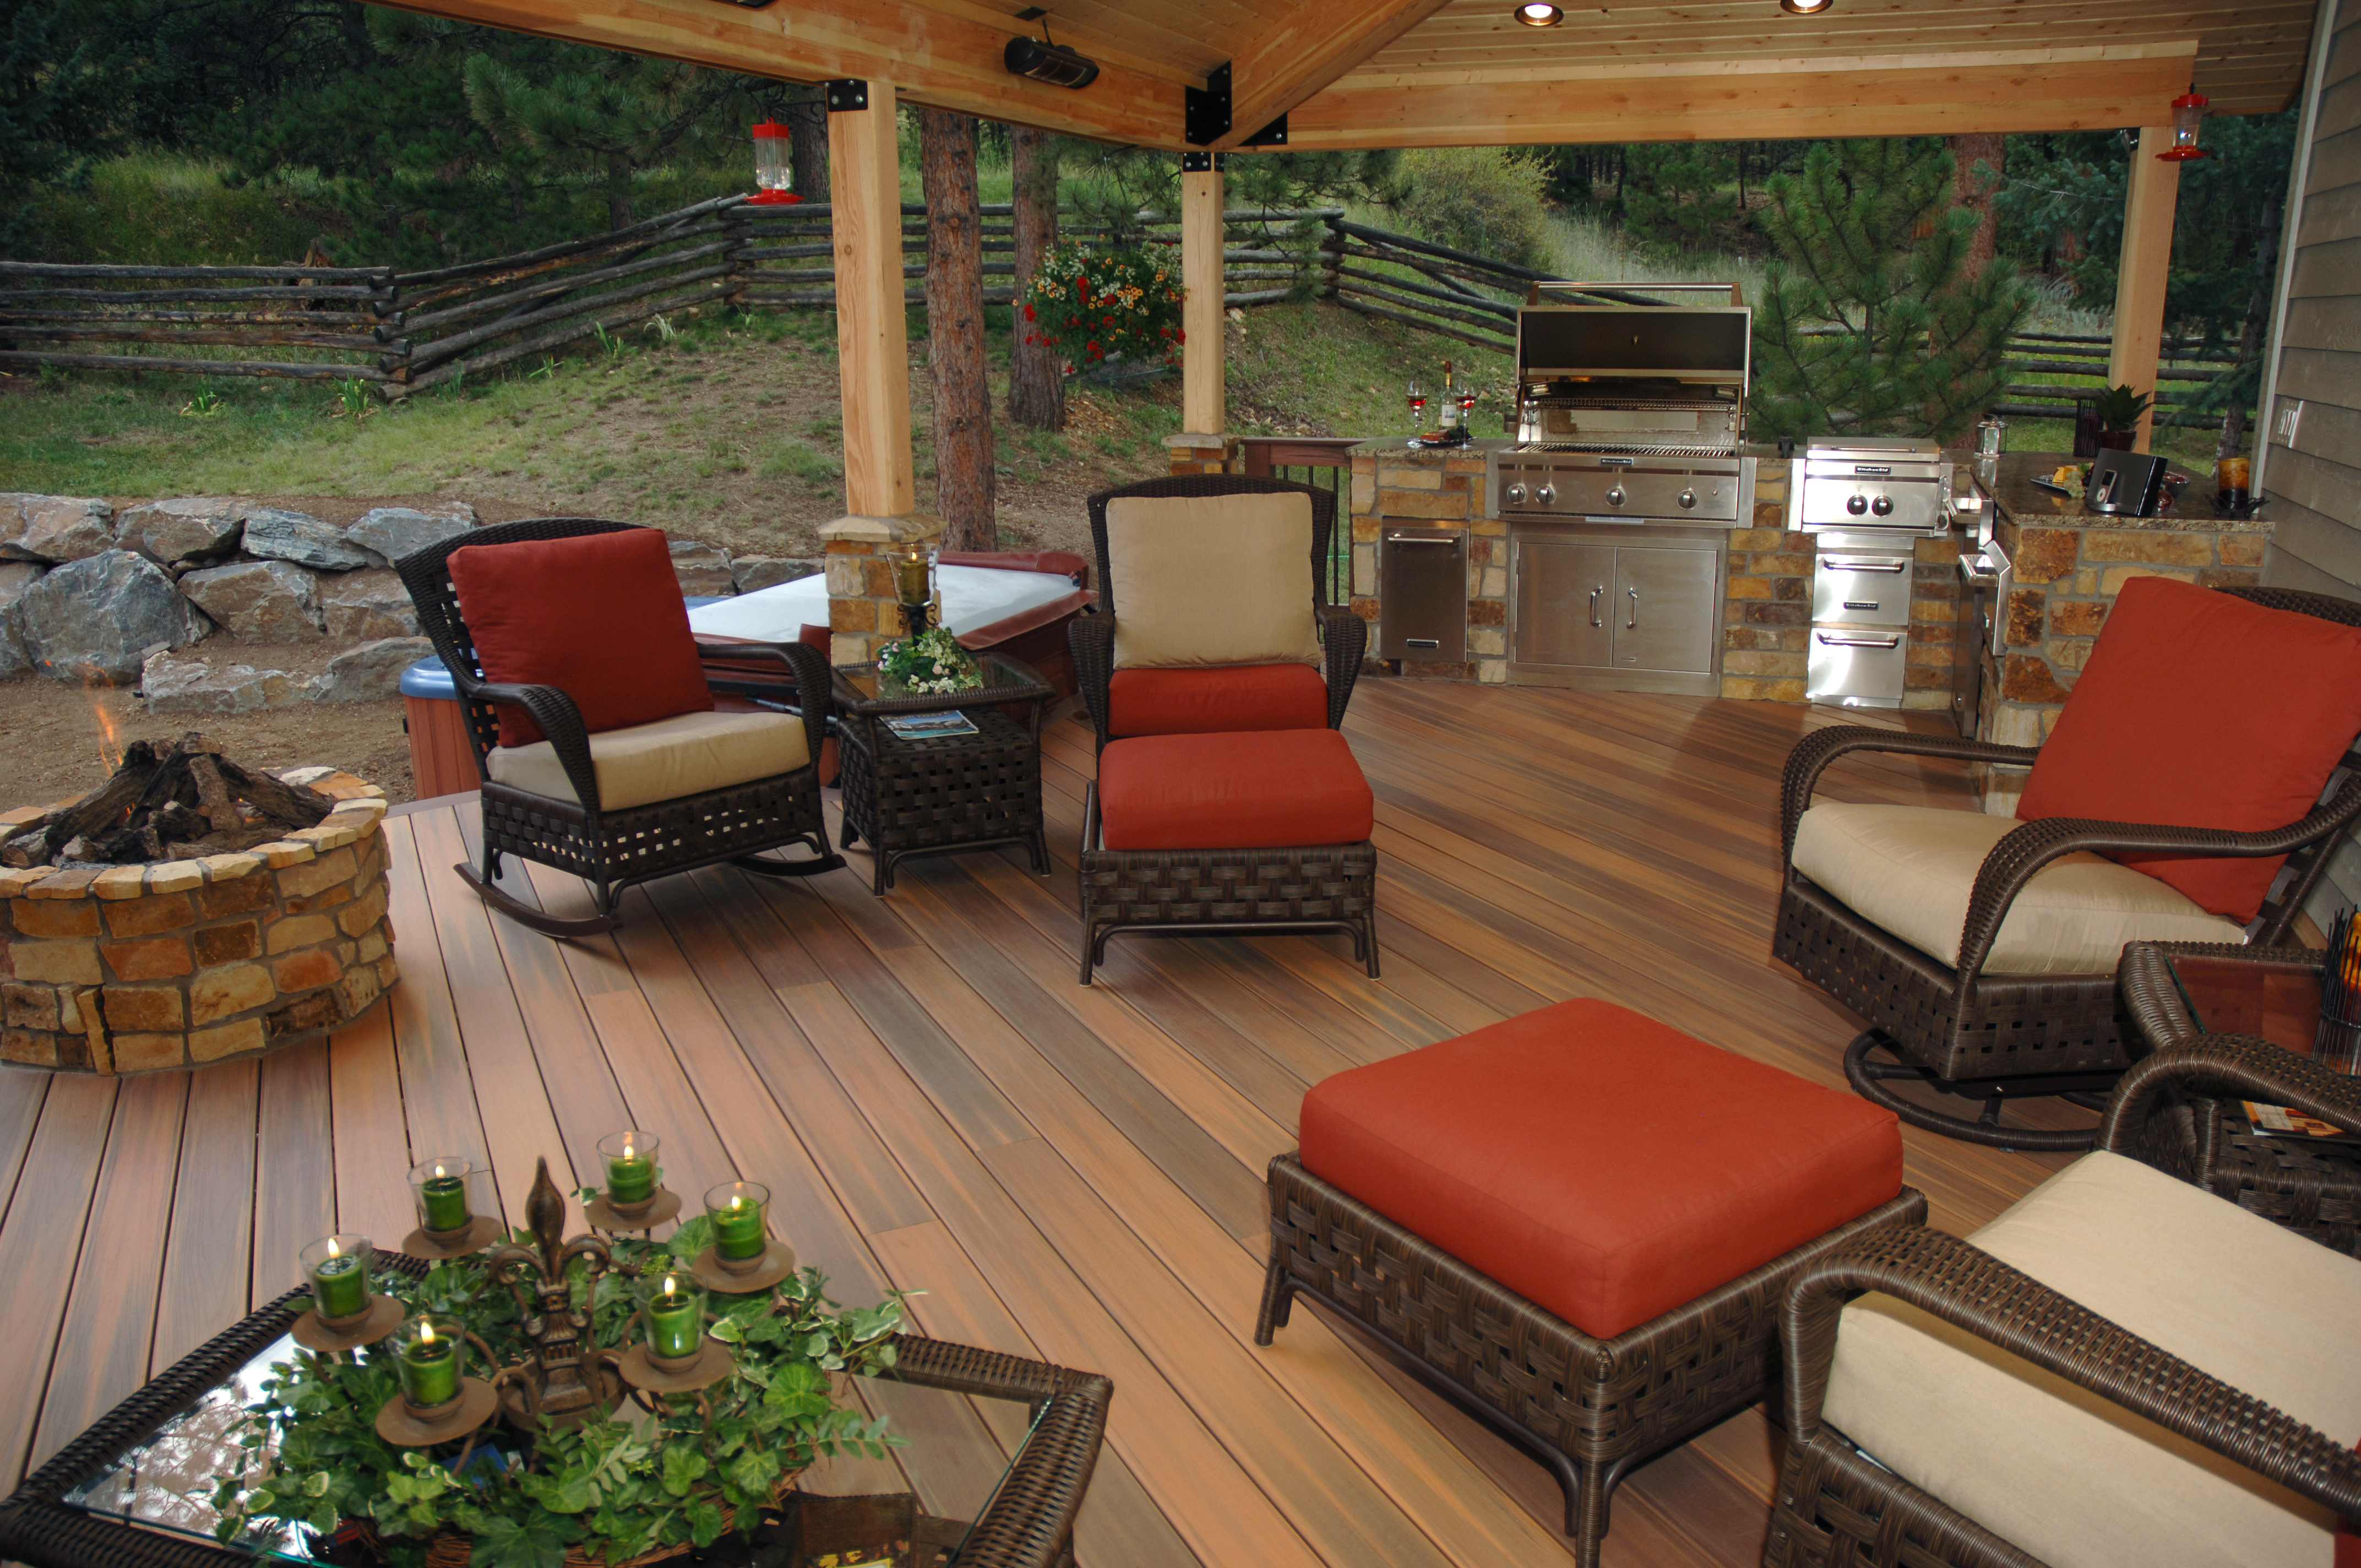  Color advances in composite decking gives homeowners a long-lasting, low-mainte